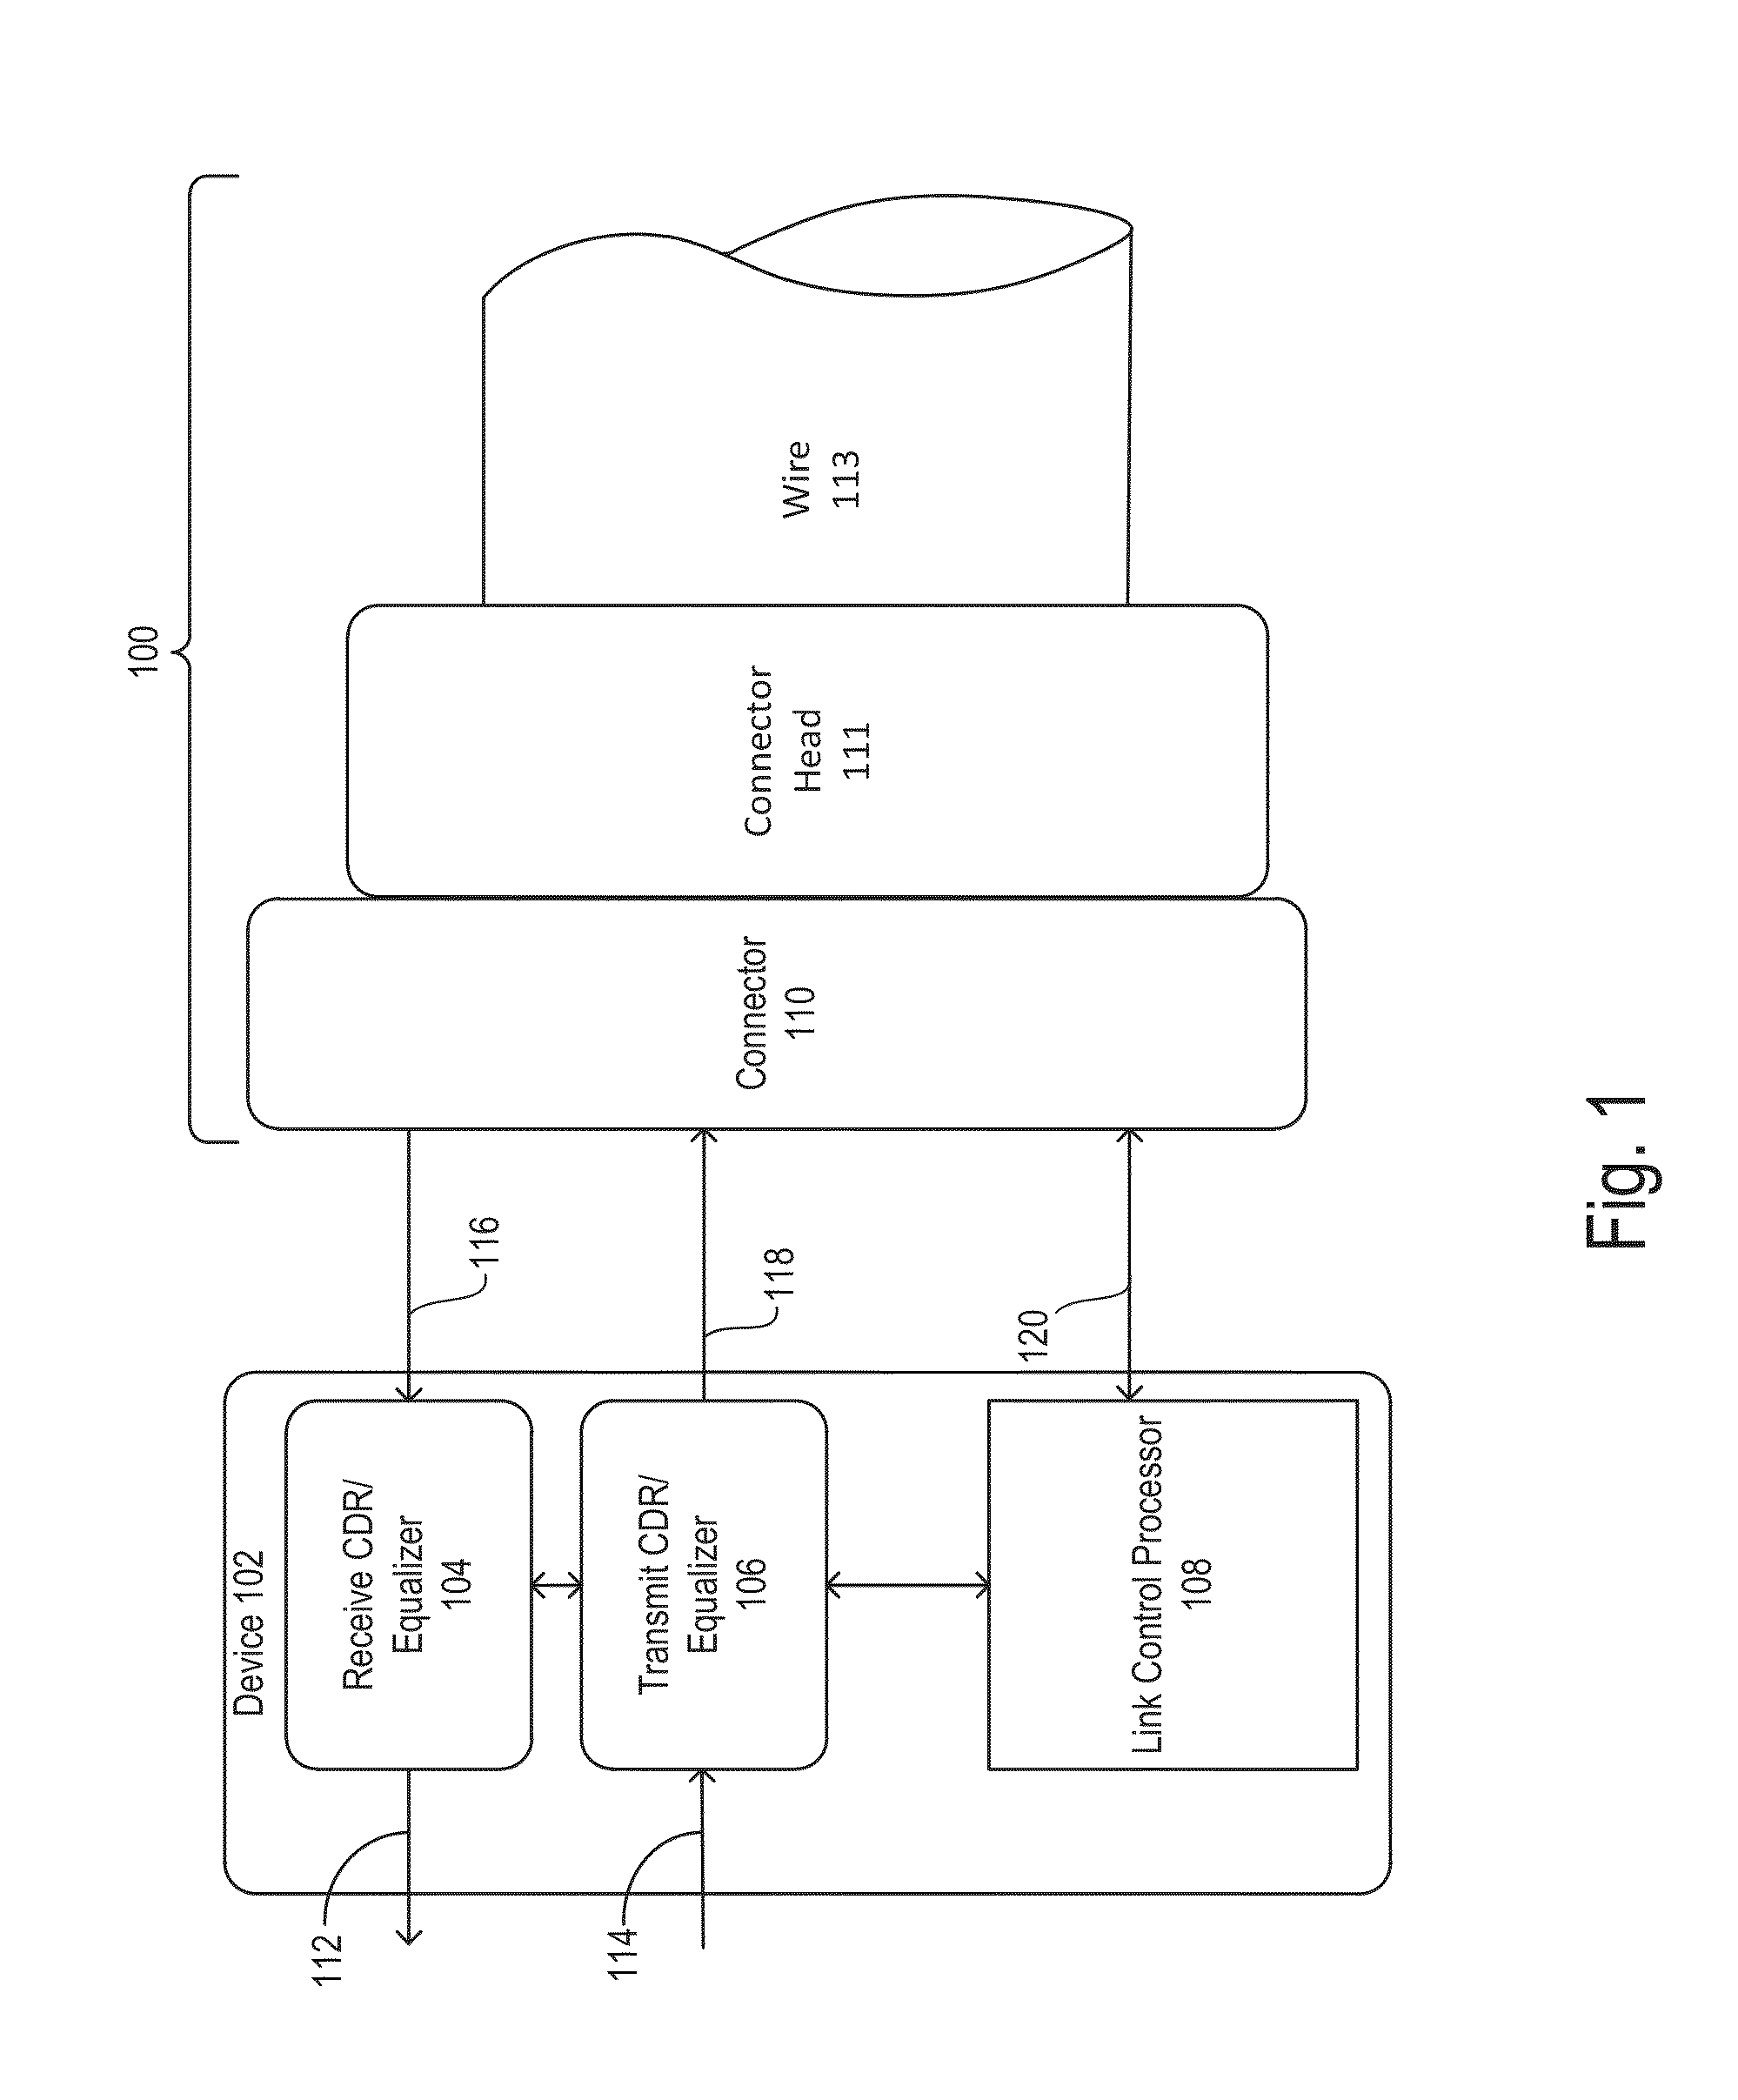 Data transfer cable system and method